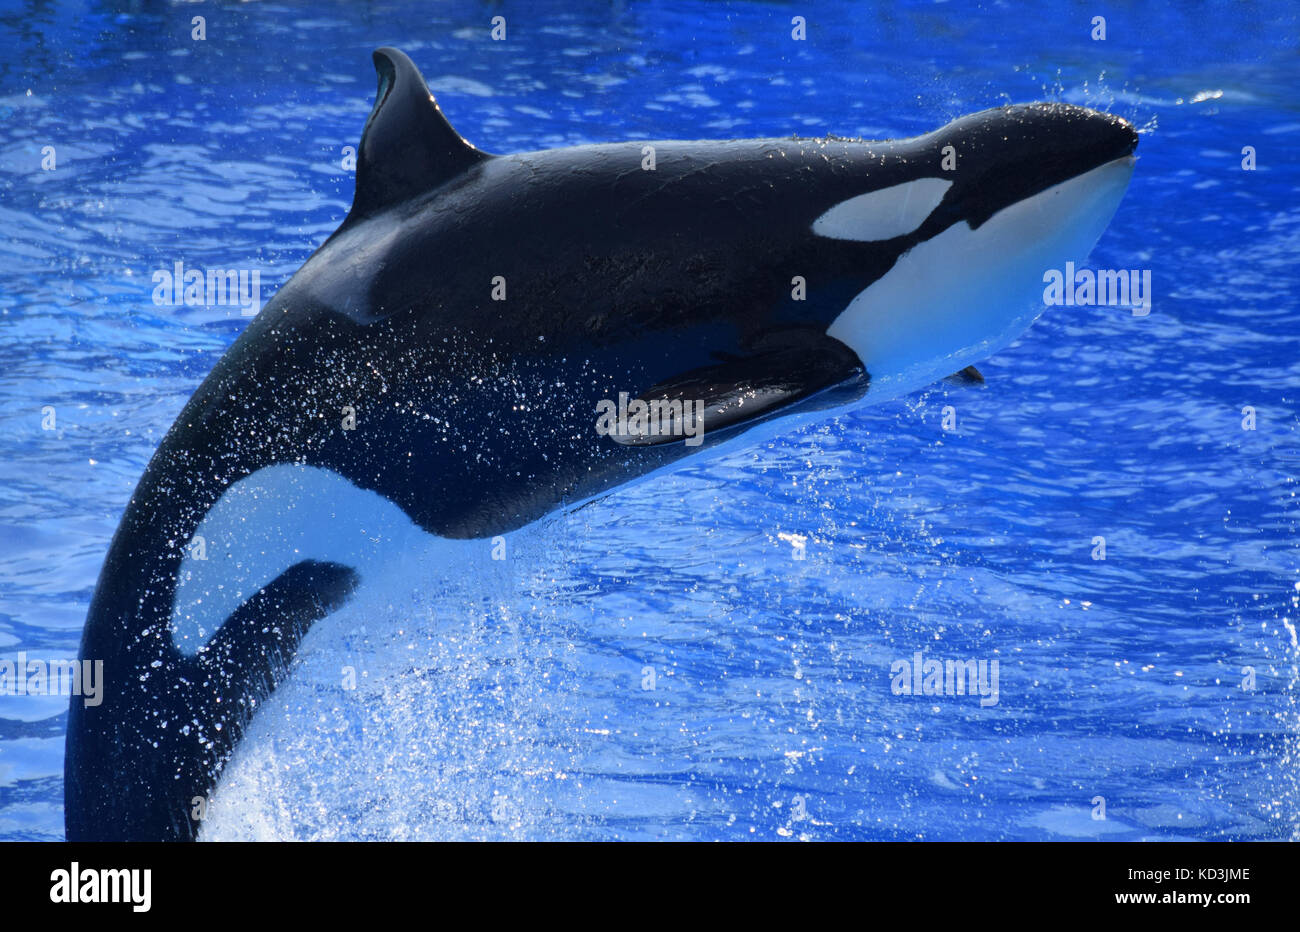 Killer whale jumpting out of blue ocean water Stock Photo